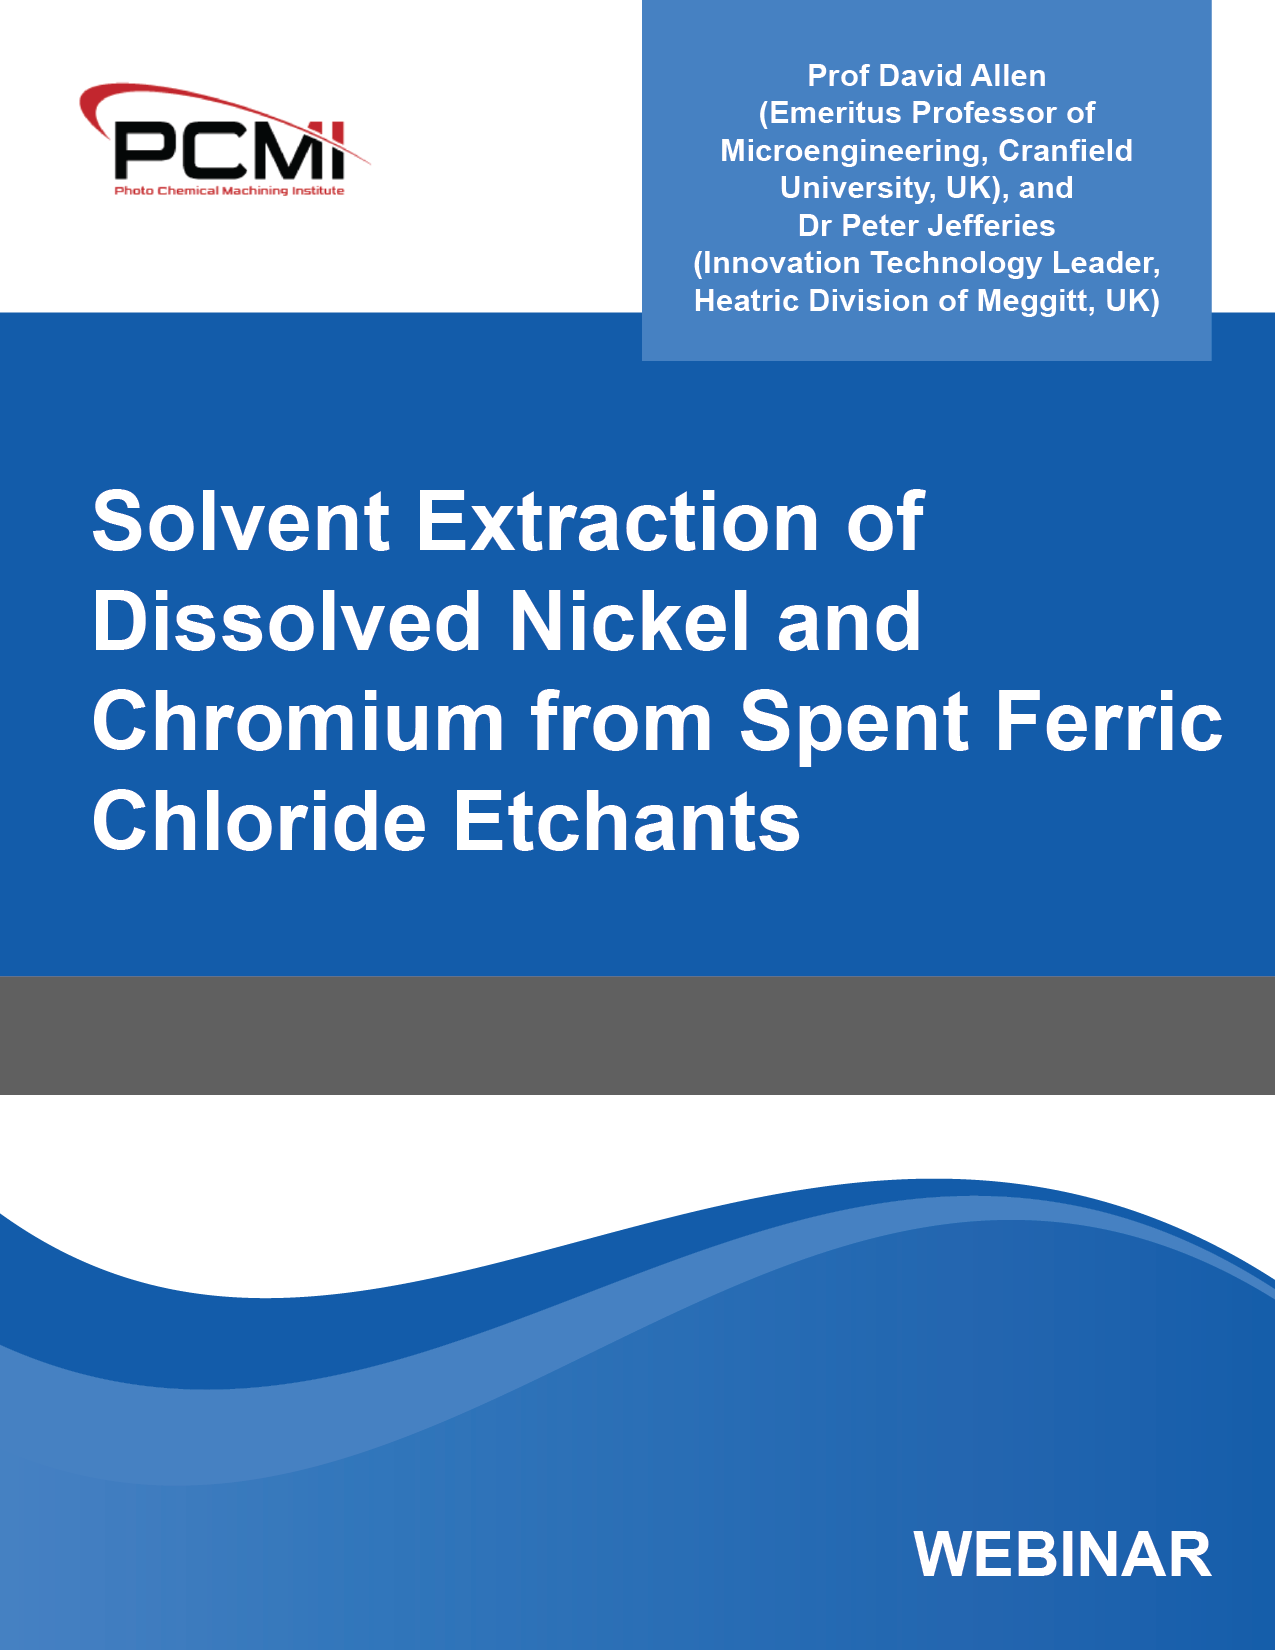 Solvent Extraction of Dissolved Nickel and Chromium from Spent Ferric Chloride Etchants